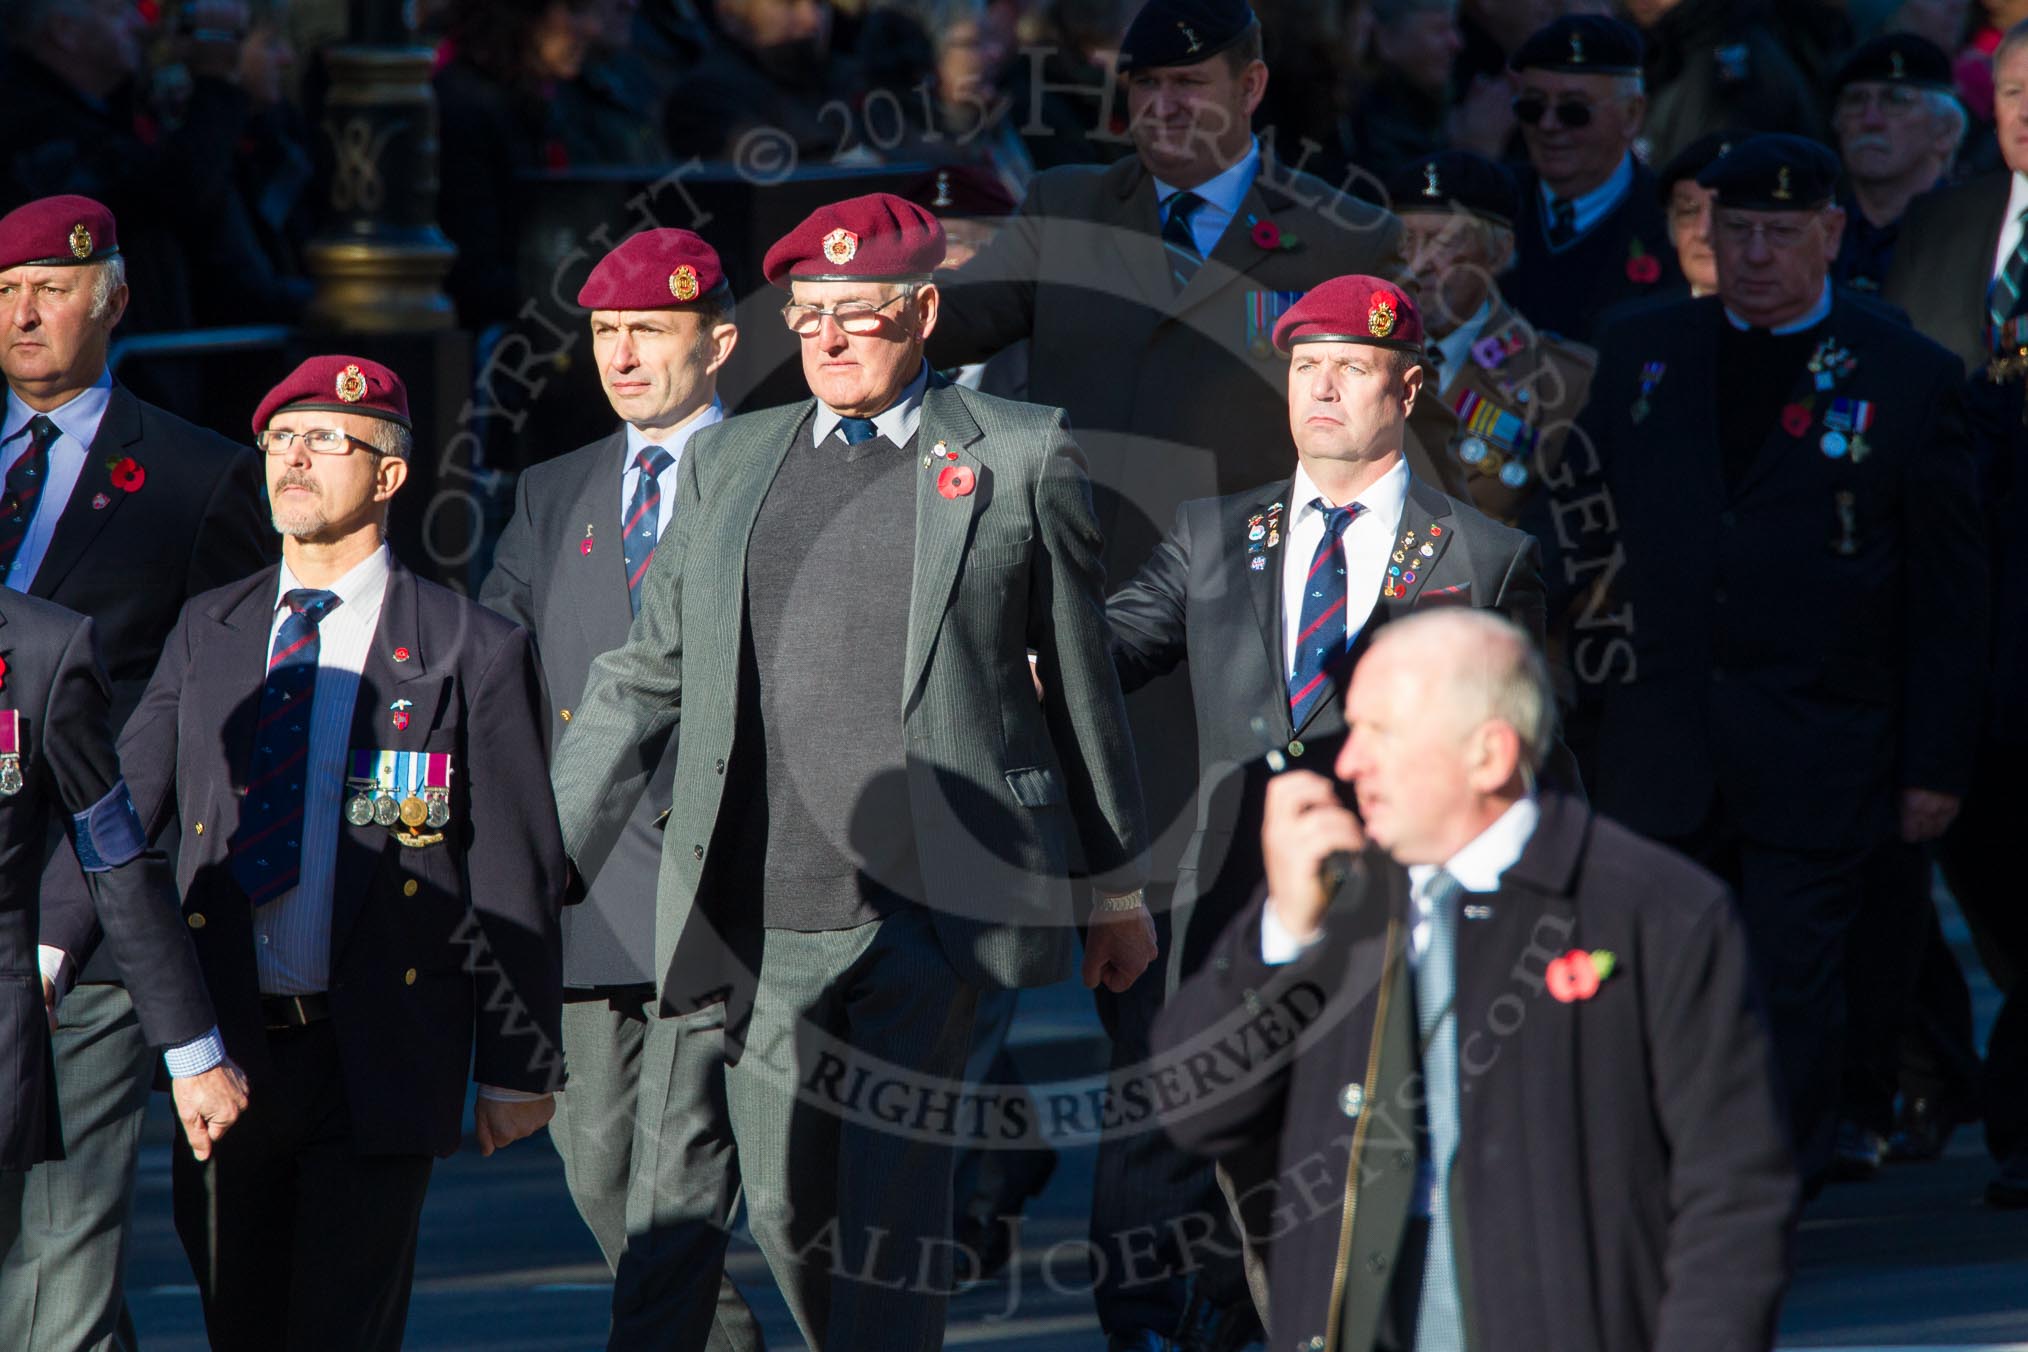 Remembrance Sunday Cenotaph March Past 2013: B22 - Airborne Engineers Association..
Press stand opposite the Foreign Office building, Whitehall, London SW1,
London,
Greater London,
United Kingdom,
on 10 November 2013 at 12:02, image #1489